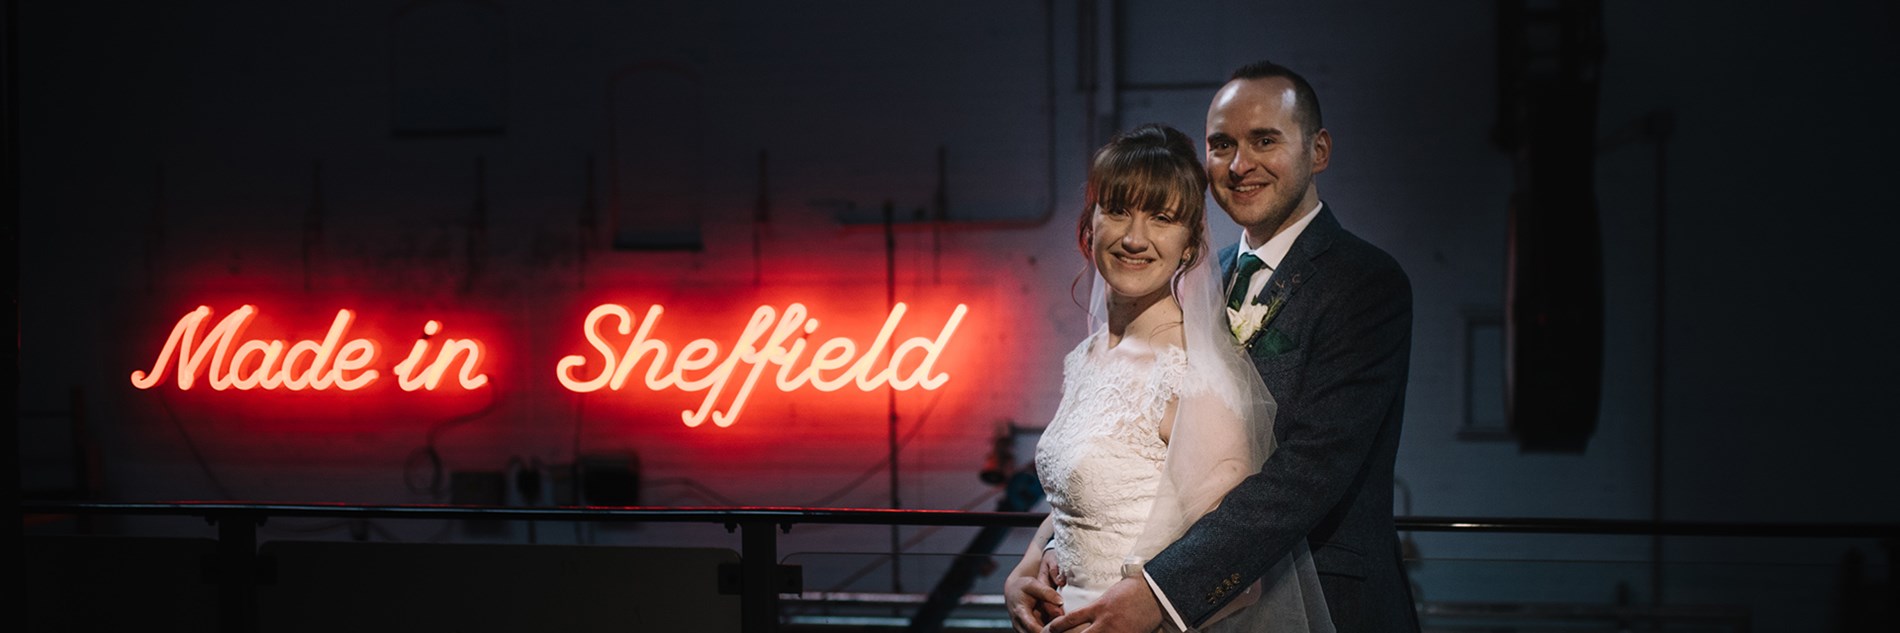 Two adults in wedding outfits in front of a "Made in Sheffield" neon sign inside Kelham Island Museum